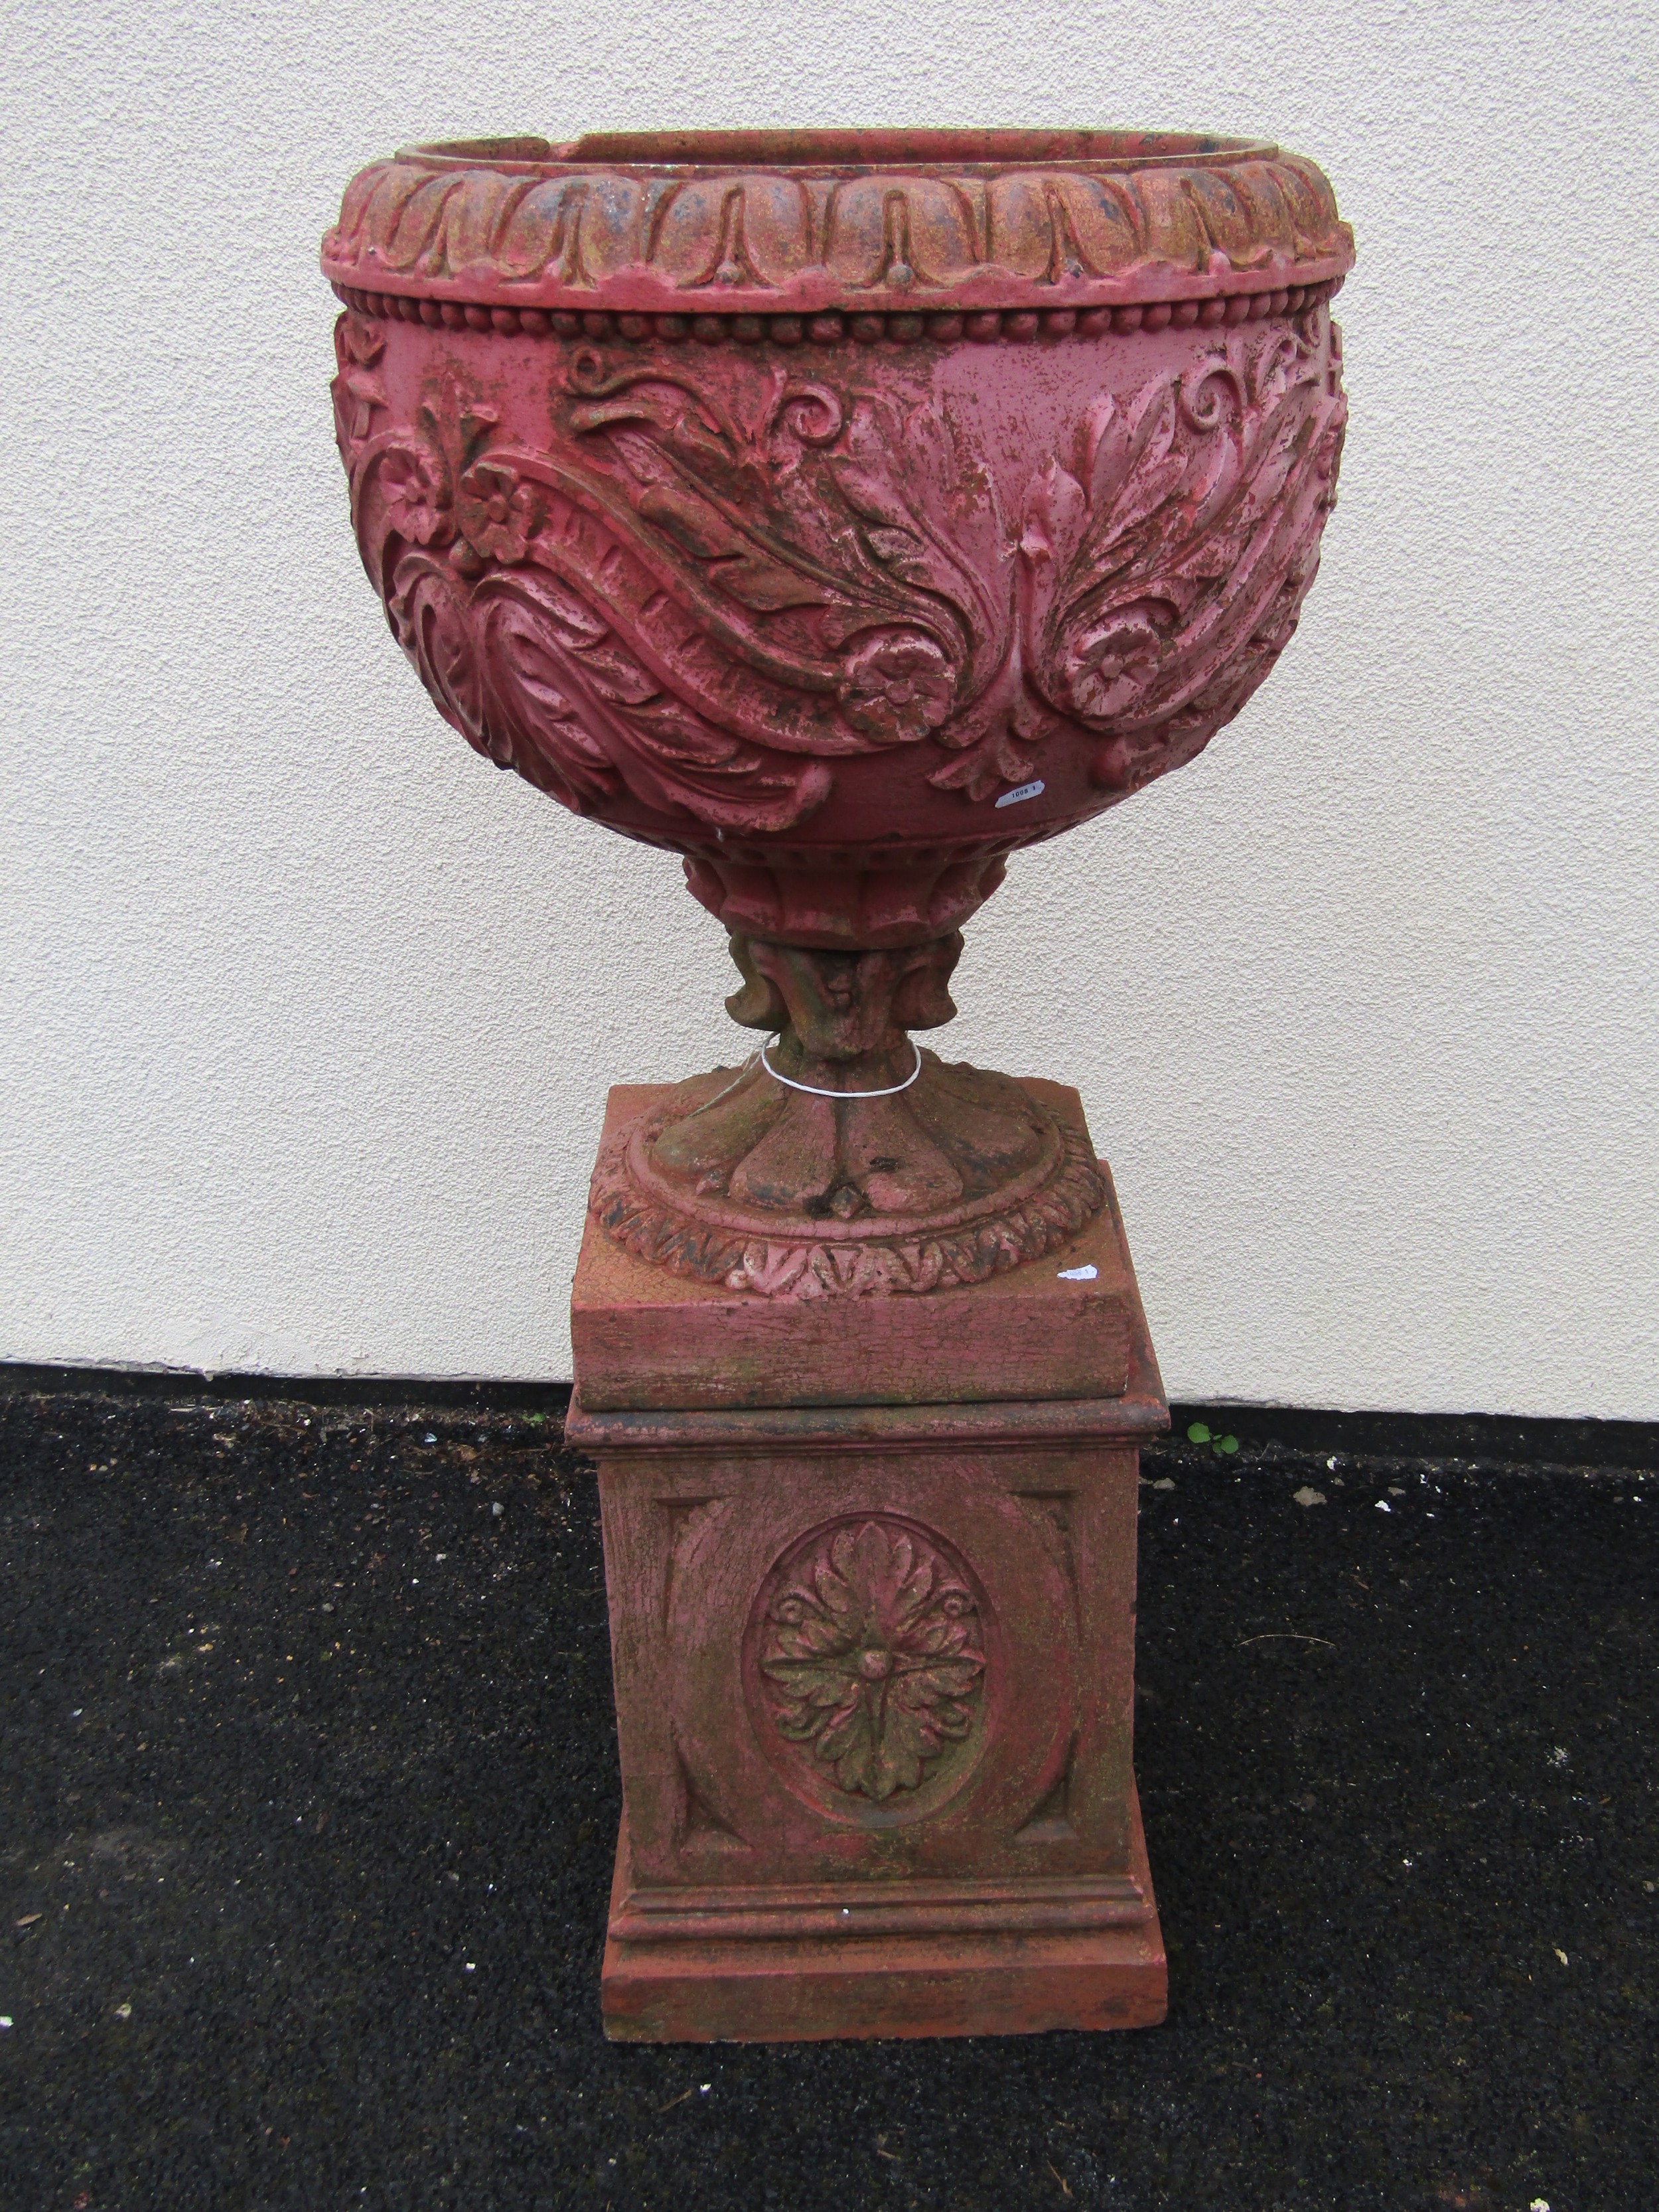 Accrington Brick Company Ltd painted and weathered terracotta garden urn, the circular bowl with